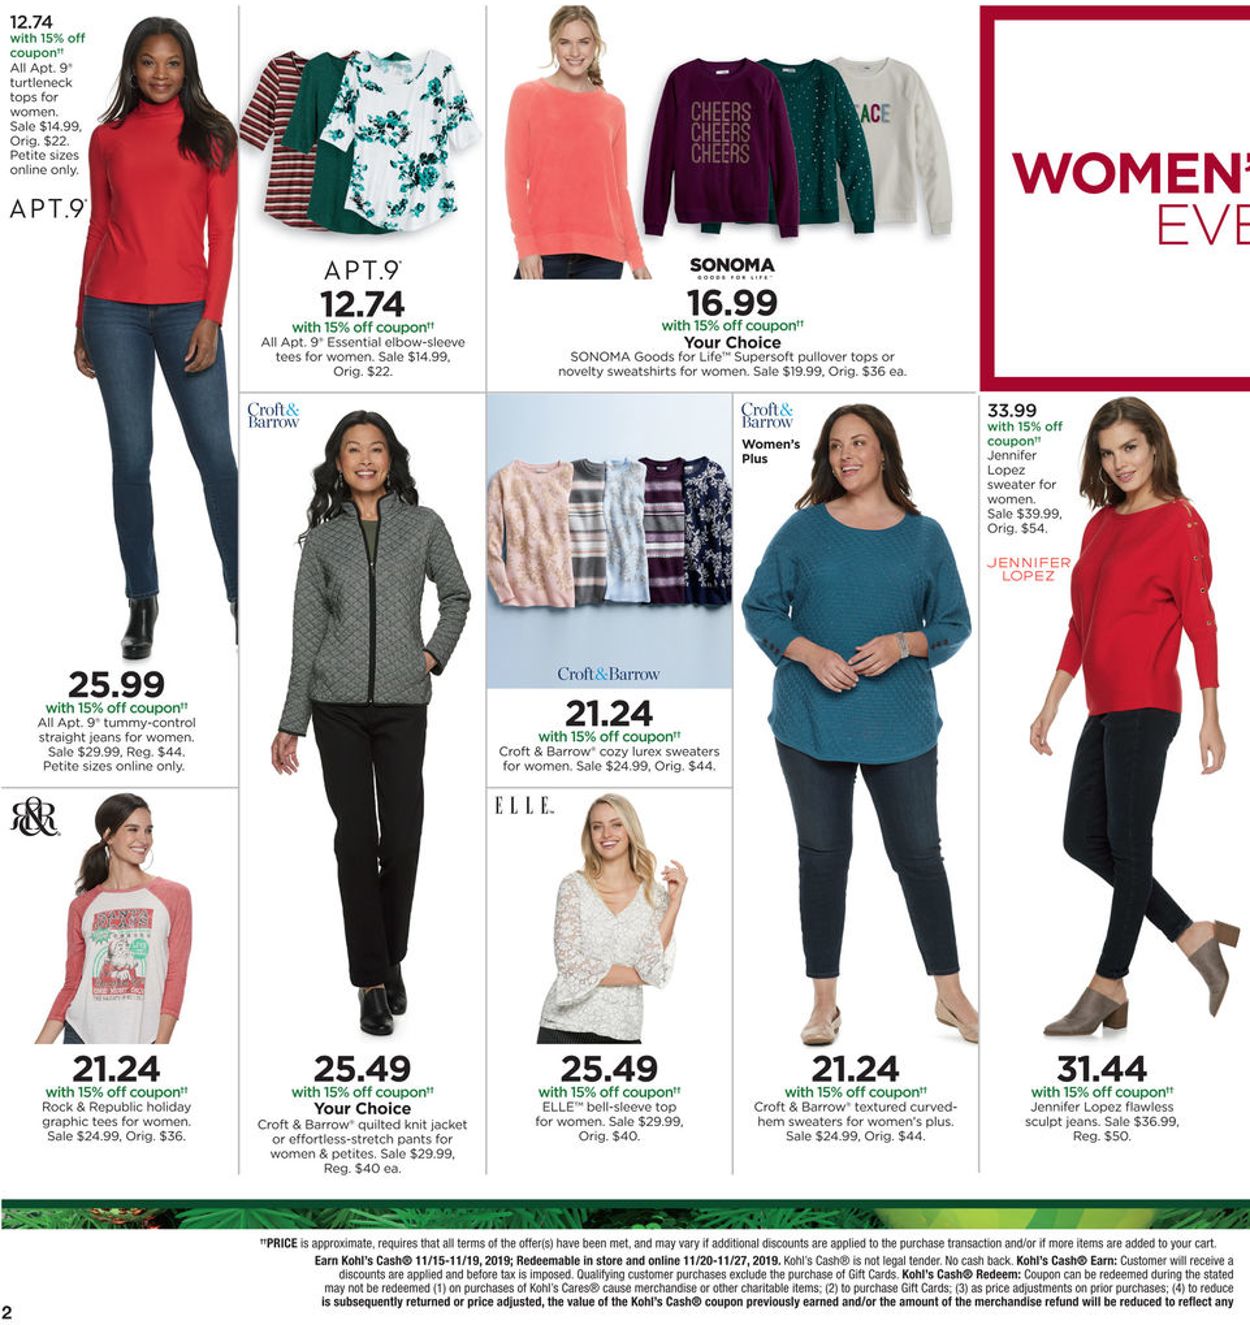 Kohl's Current weekly ad 11/15 - 11/17/2019 [2] - frequent-ads.com